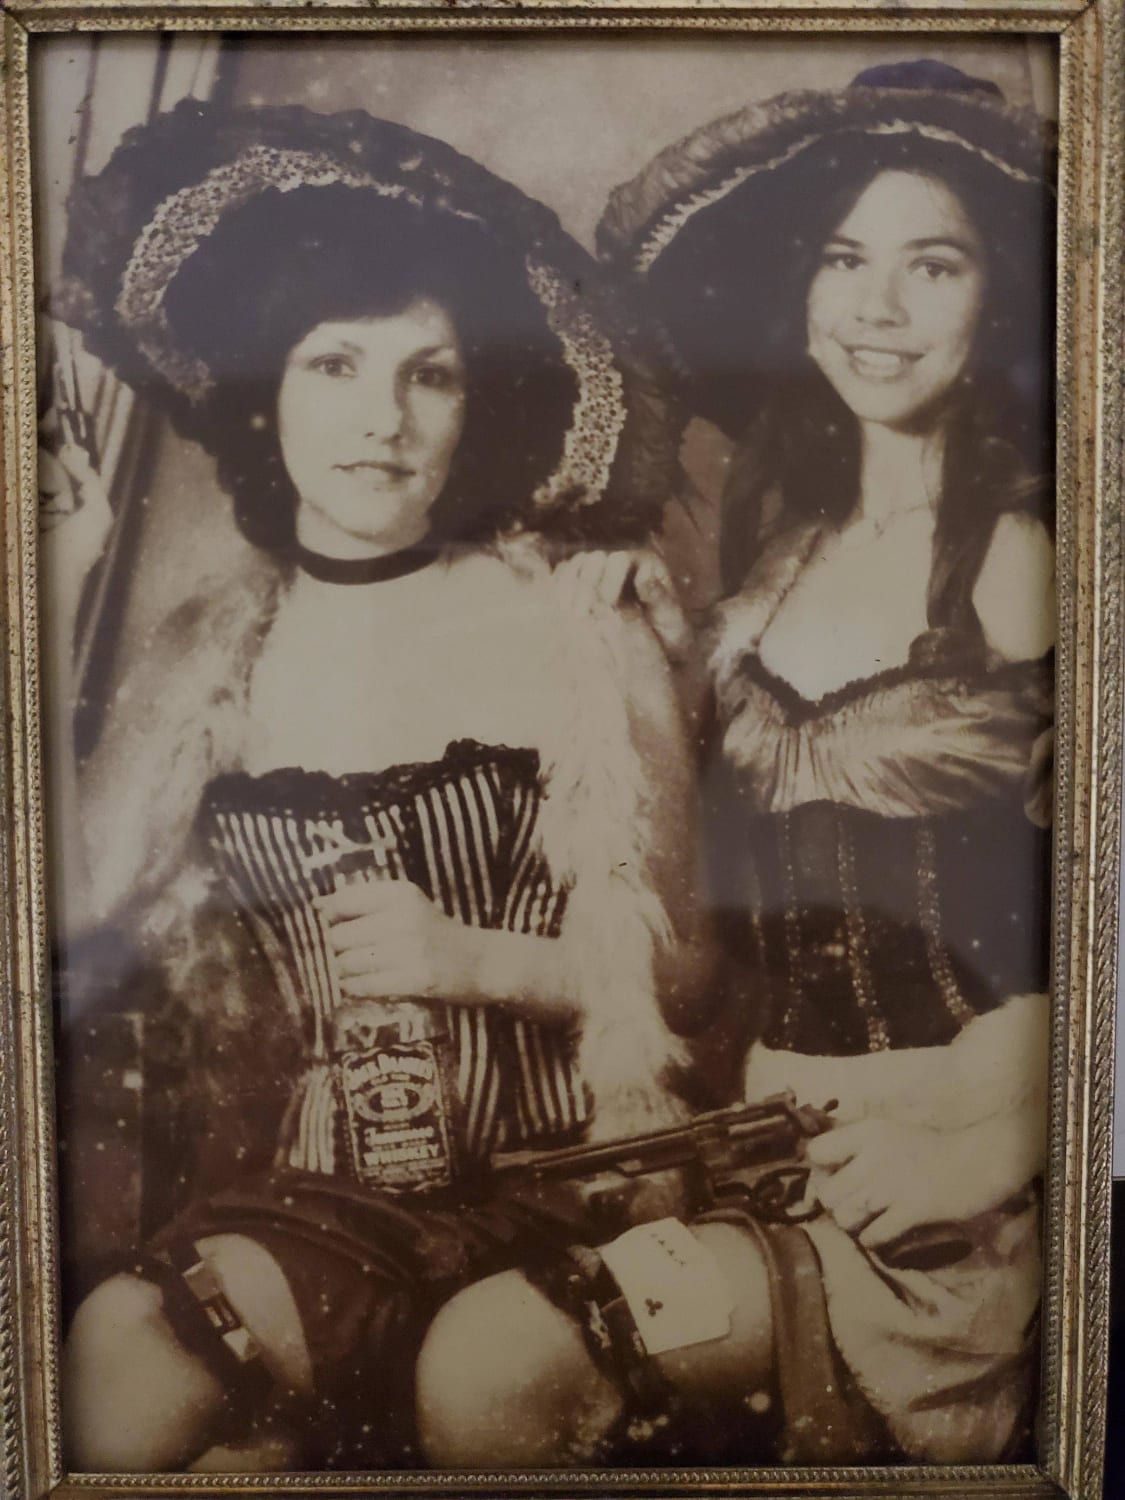 My mom (holding the Jack Daniels bottle) and her best friend in Fort Worth Texas sometime in the early 80s